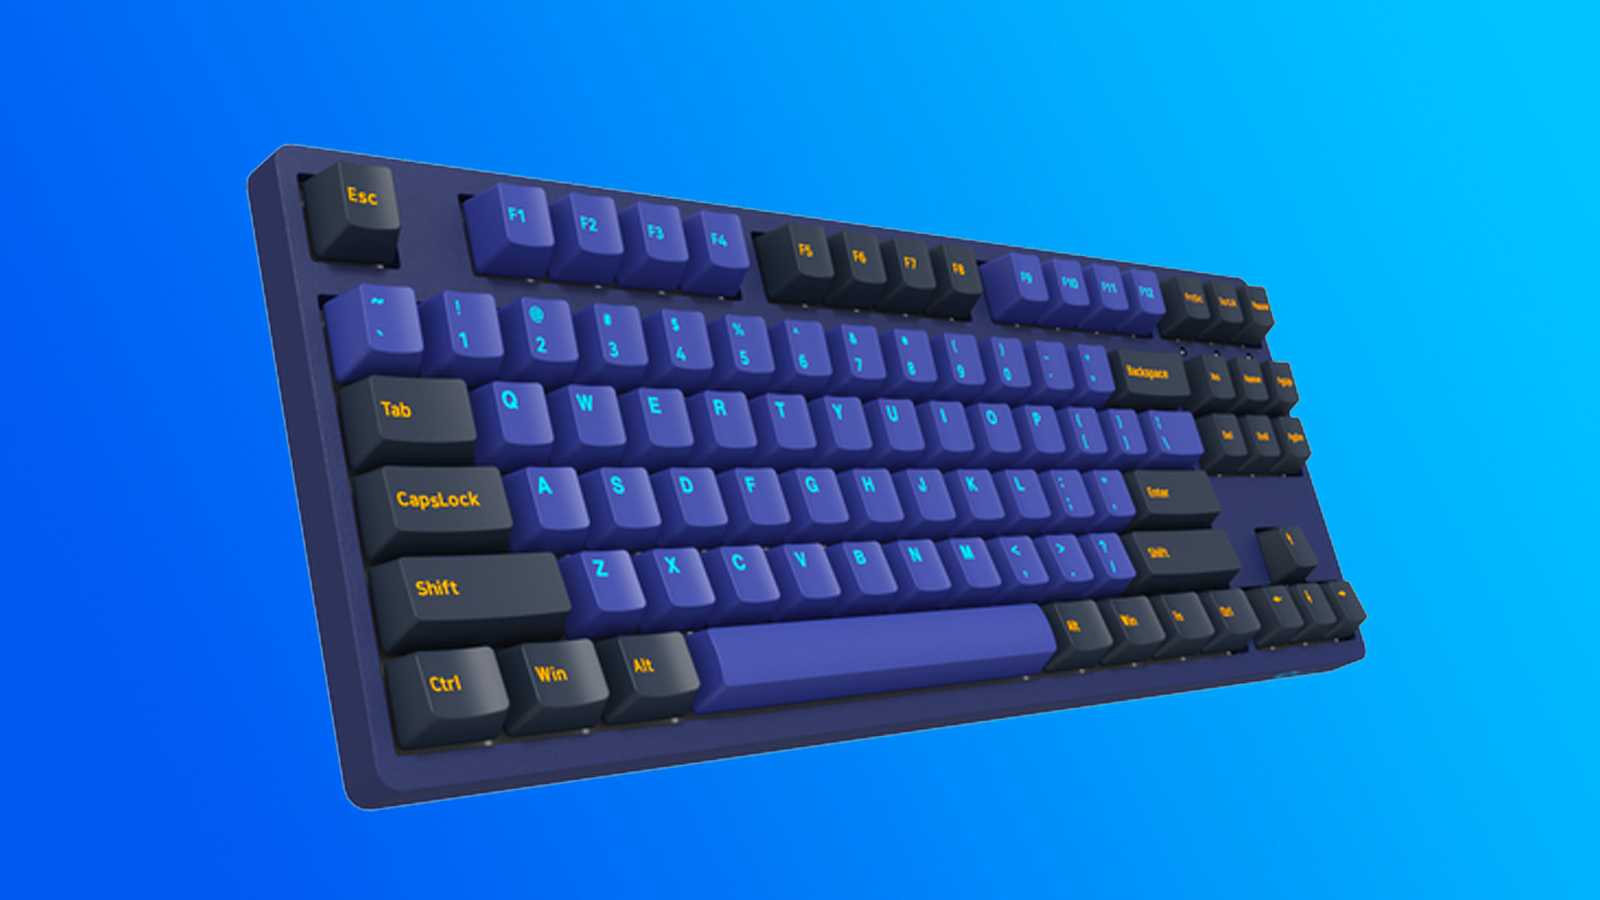 The ultimate first mechanical keyboard is just £61 on